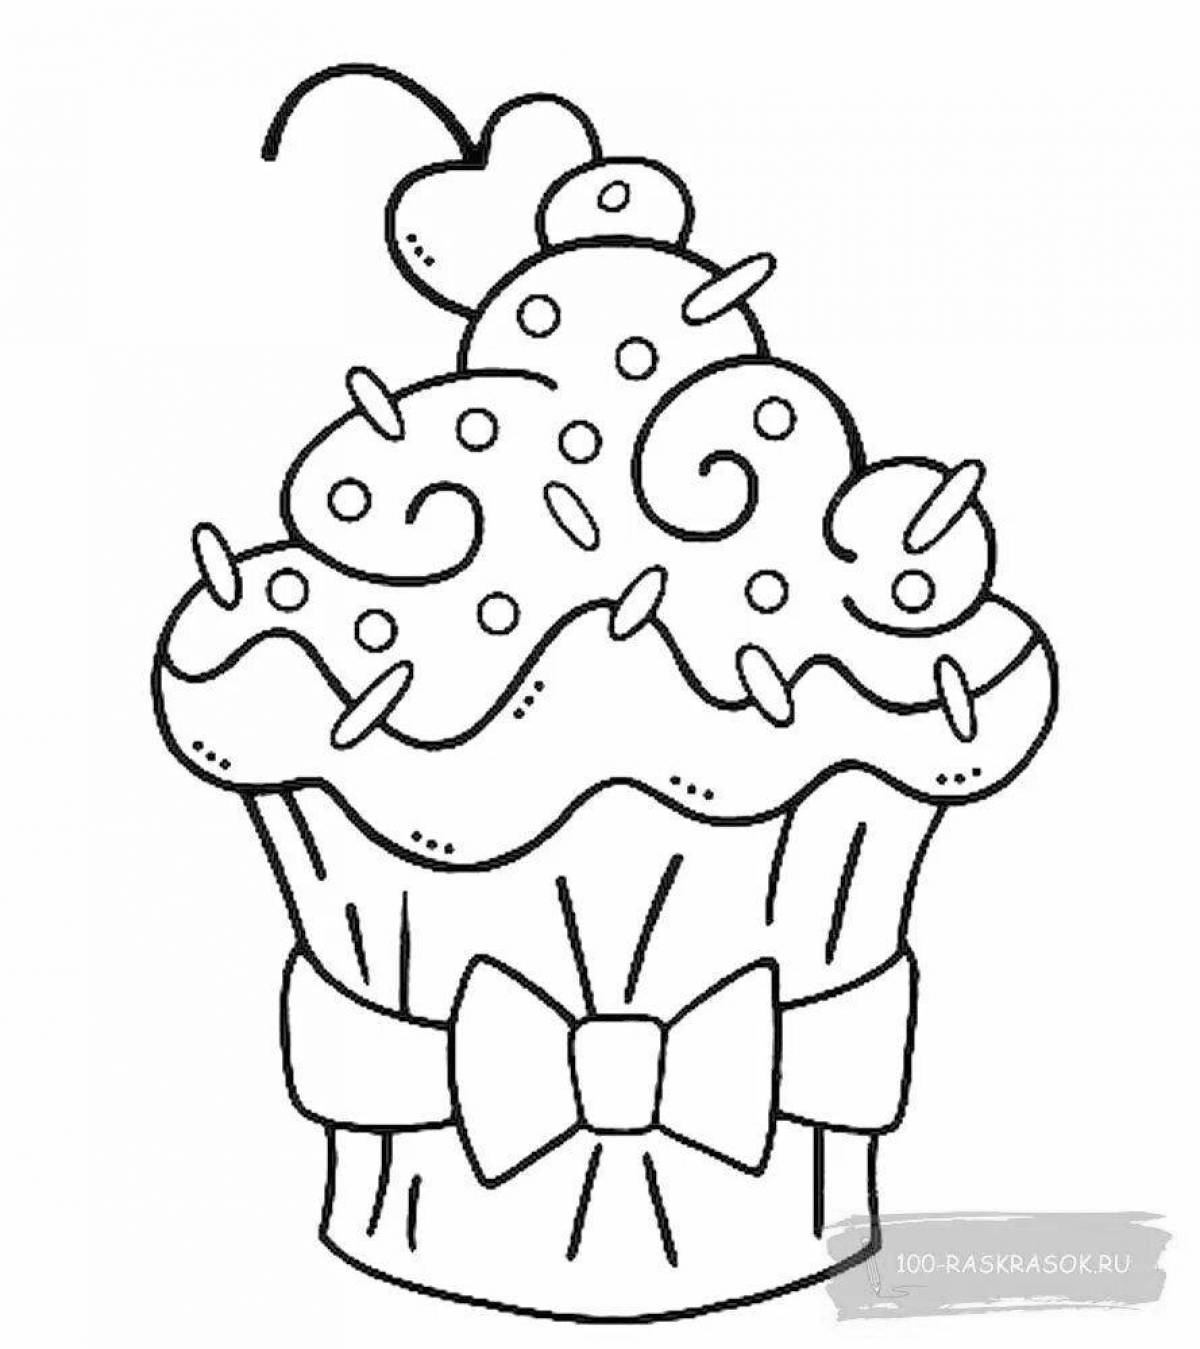 Exquisite cake coloring book for kids